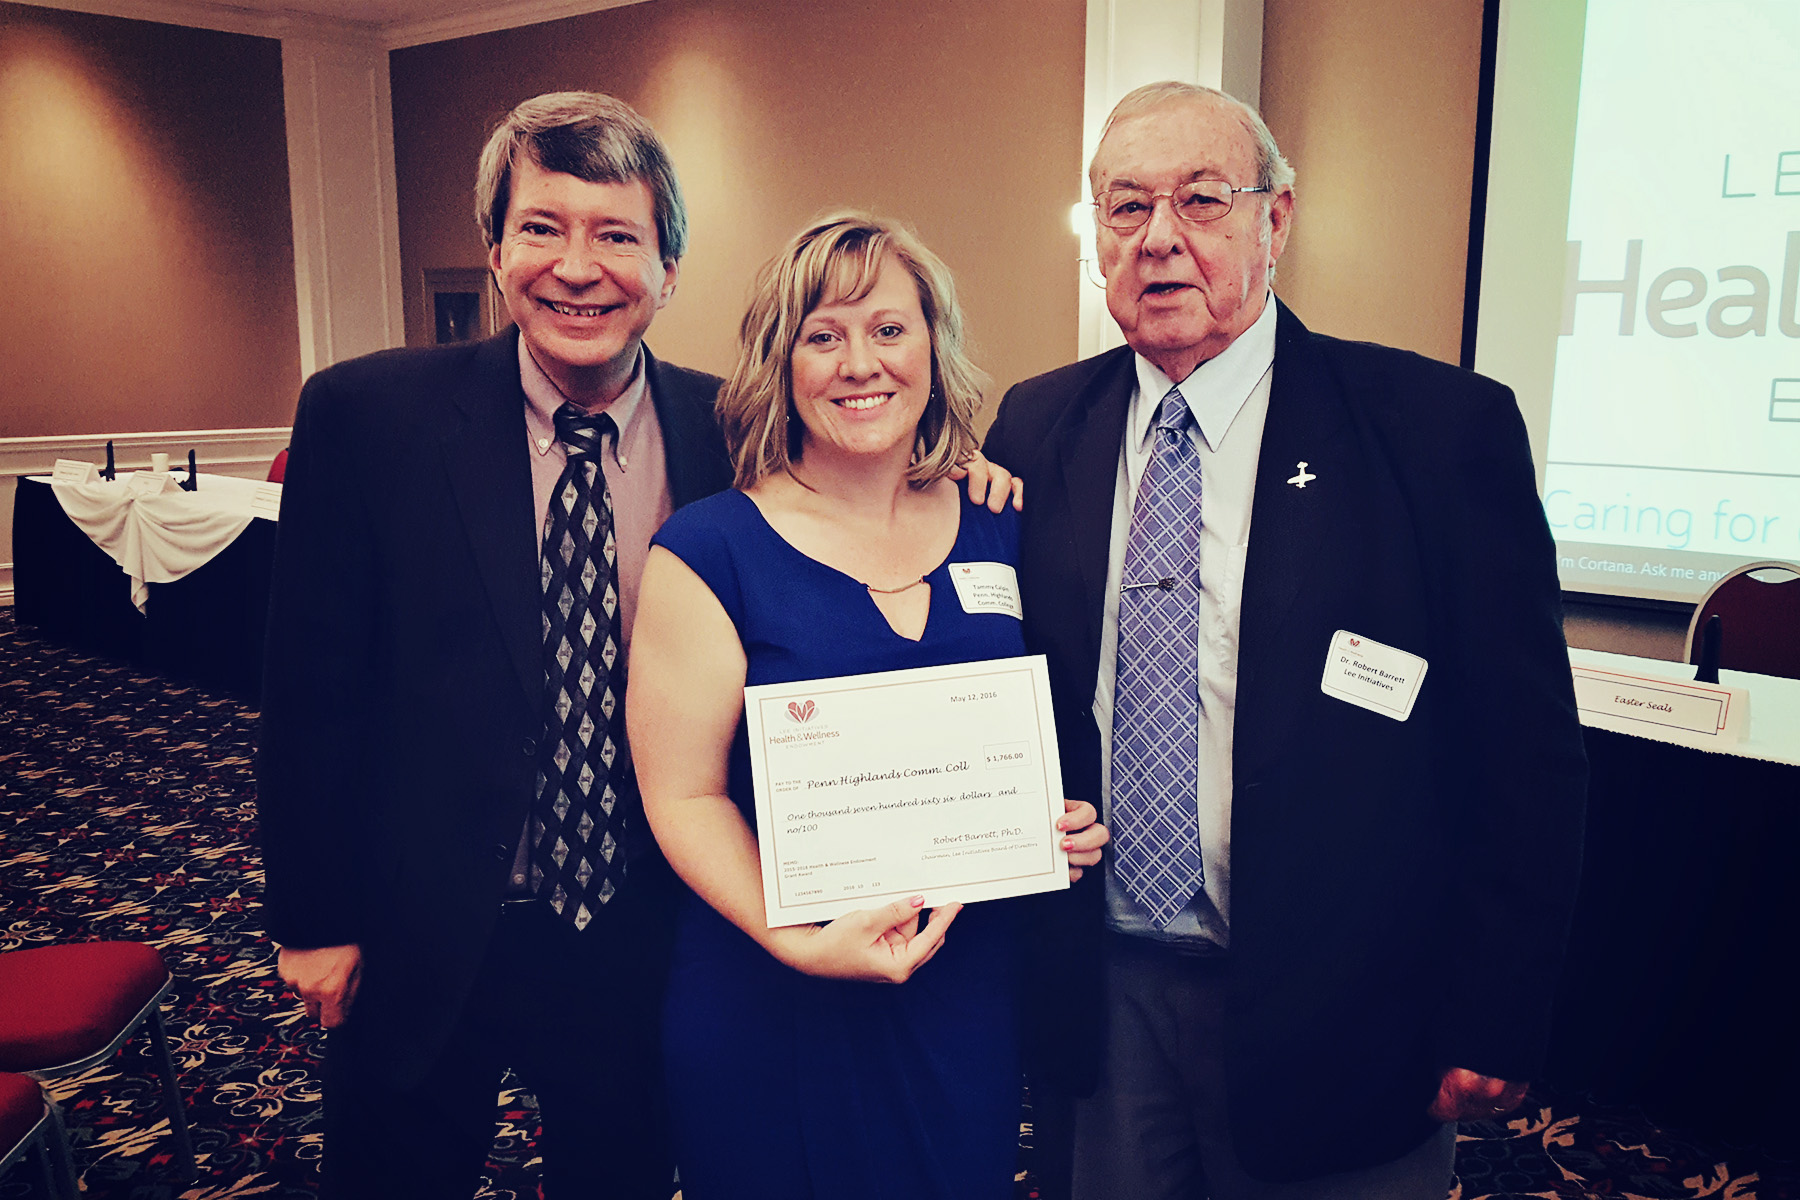 Photo includes (left to right): Rick Bukoski, Instructor of Communication and Media Studies; Tammy Calpin, Instructor of Medical Assisting and Practicum Coordinator; and Dr. Robert Barrett, Chairman of Lee Initiatives. The photo was taken during the Lee Initiatives Grant Awards Ceremony. 